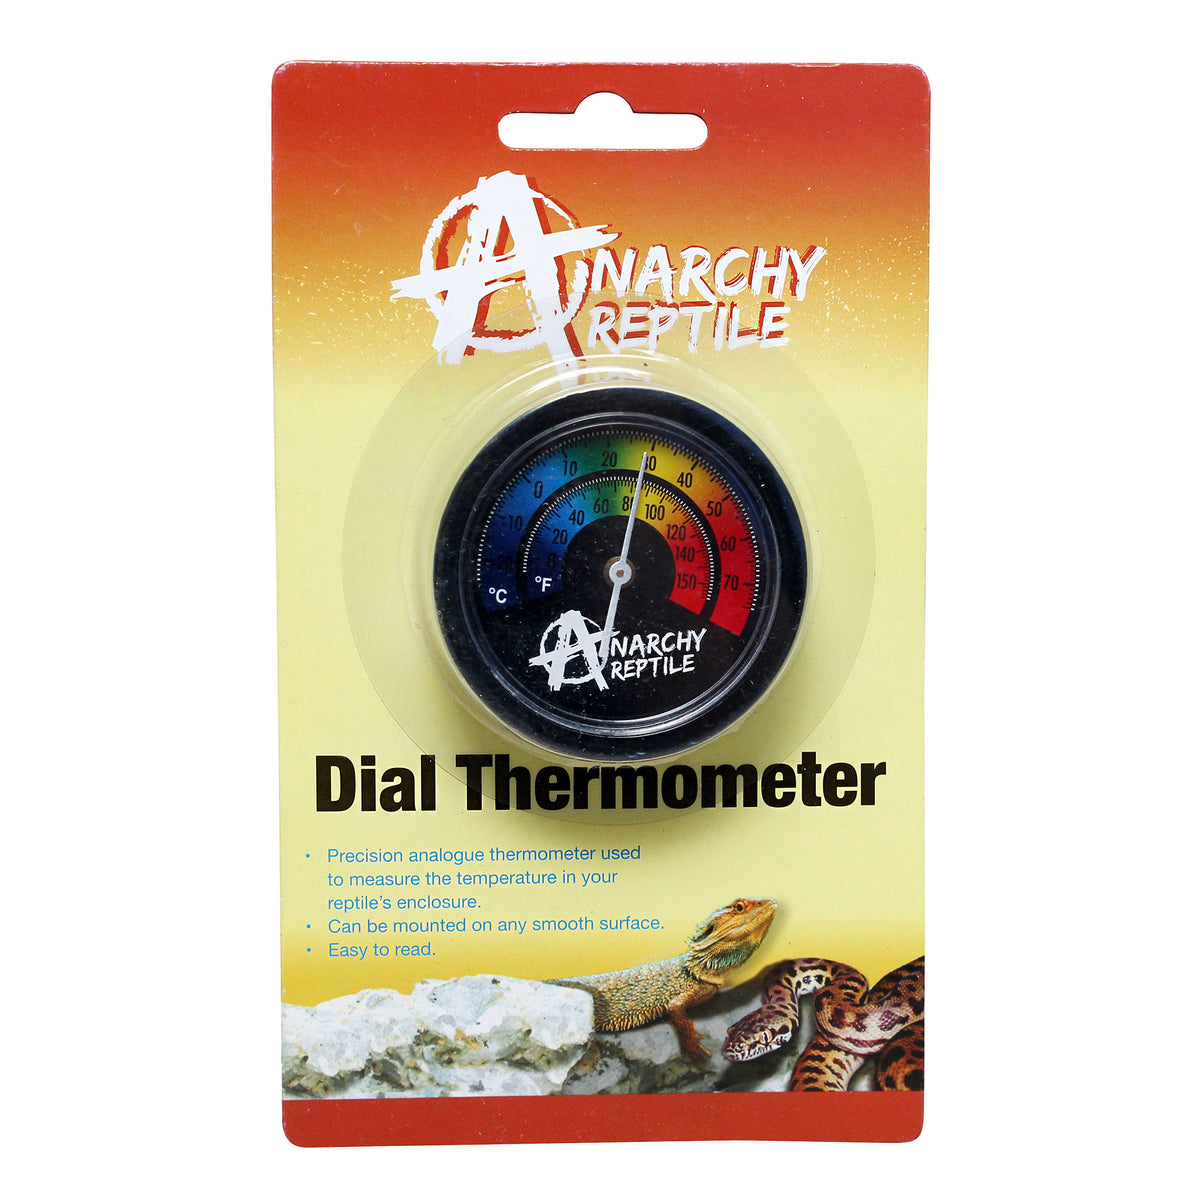 Anarchy Reptile Enclosure Dial Thermometer